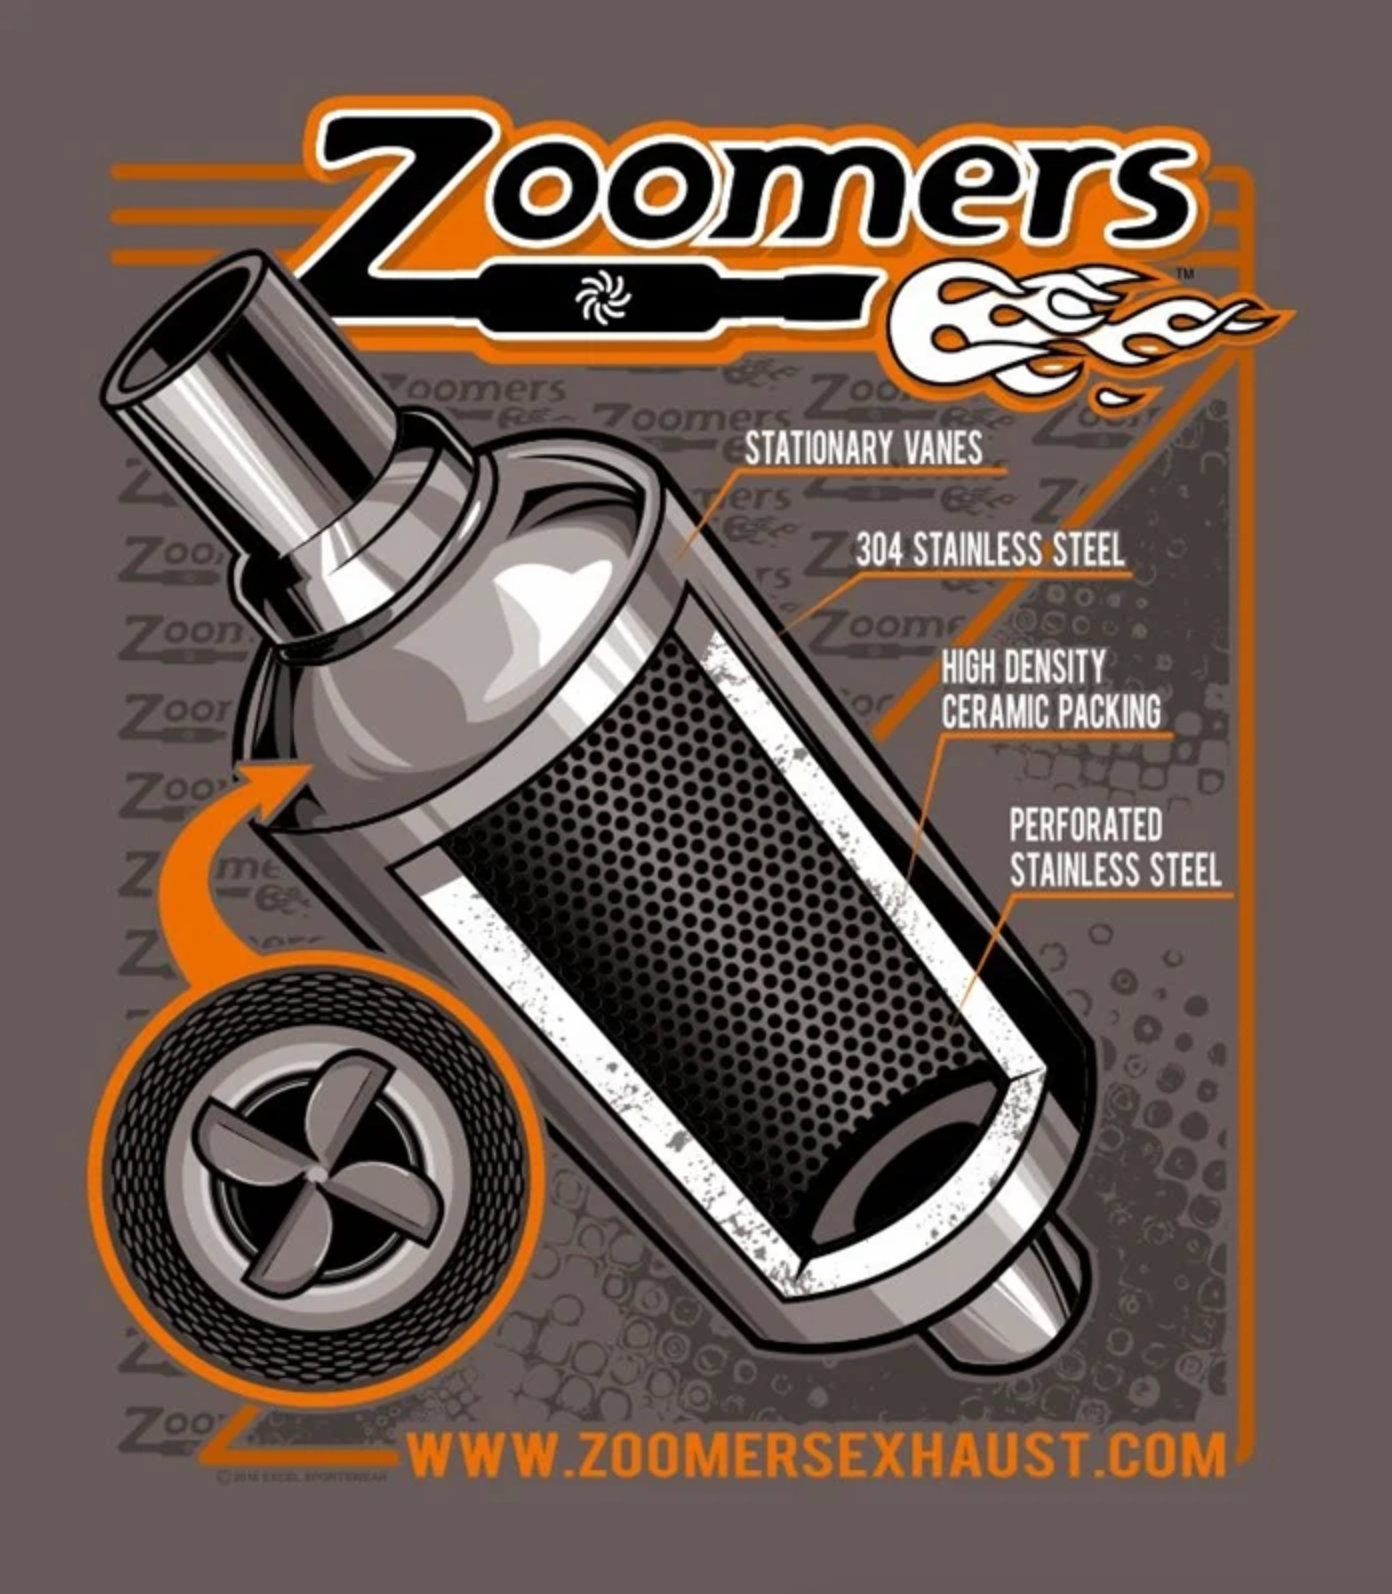 Zoomers Exhaust T-shirt